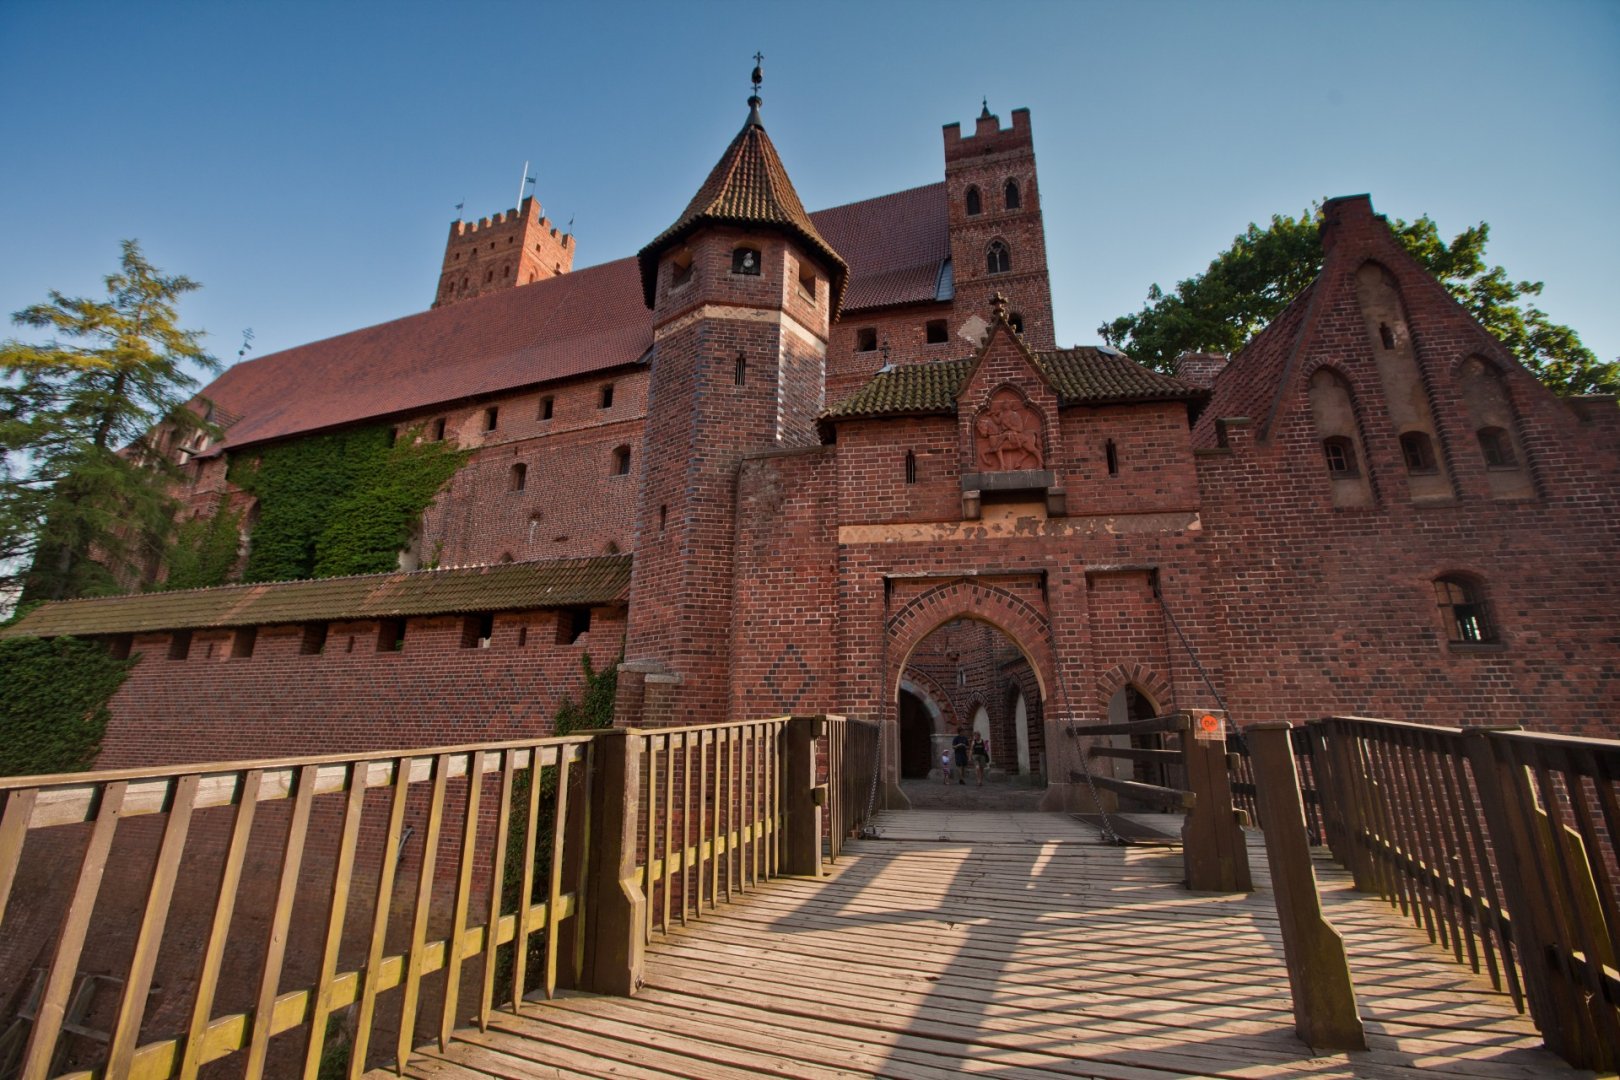 Medieval tourist attractions in Poland